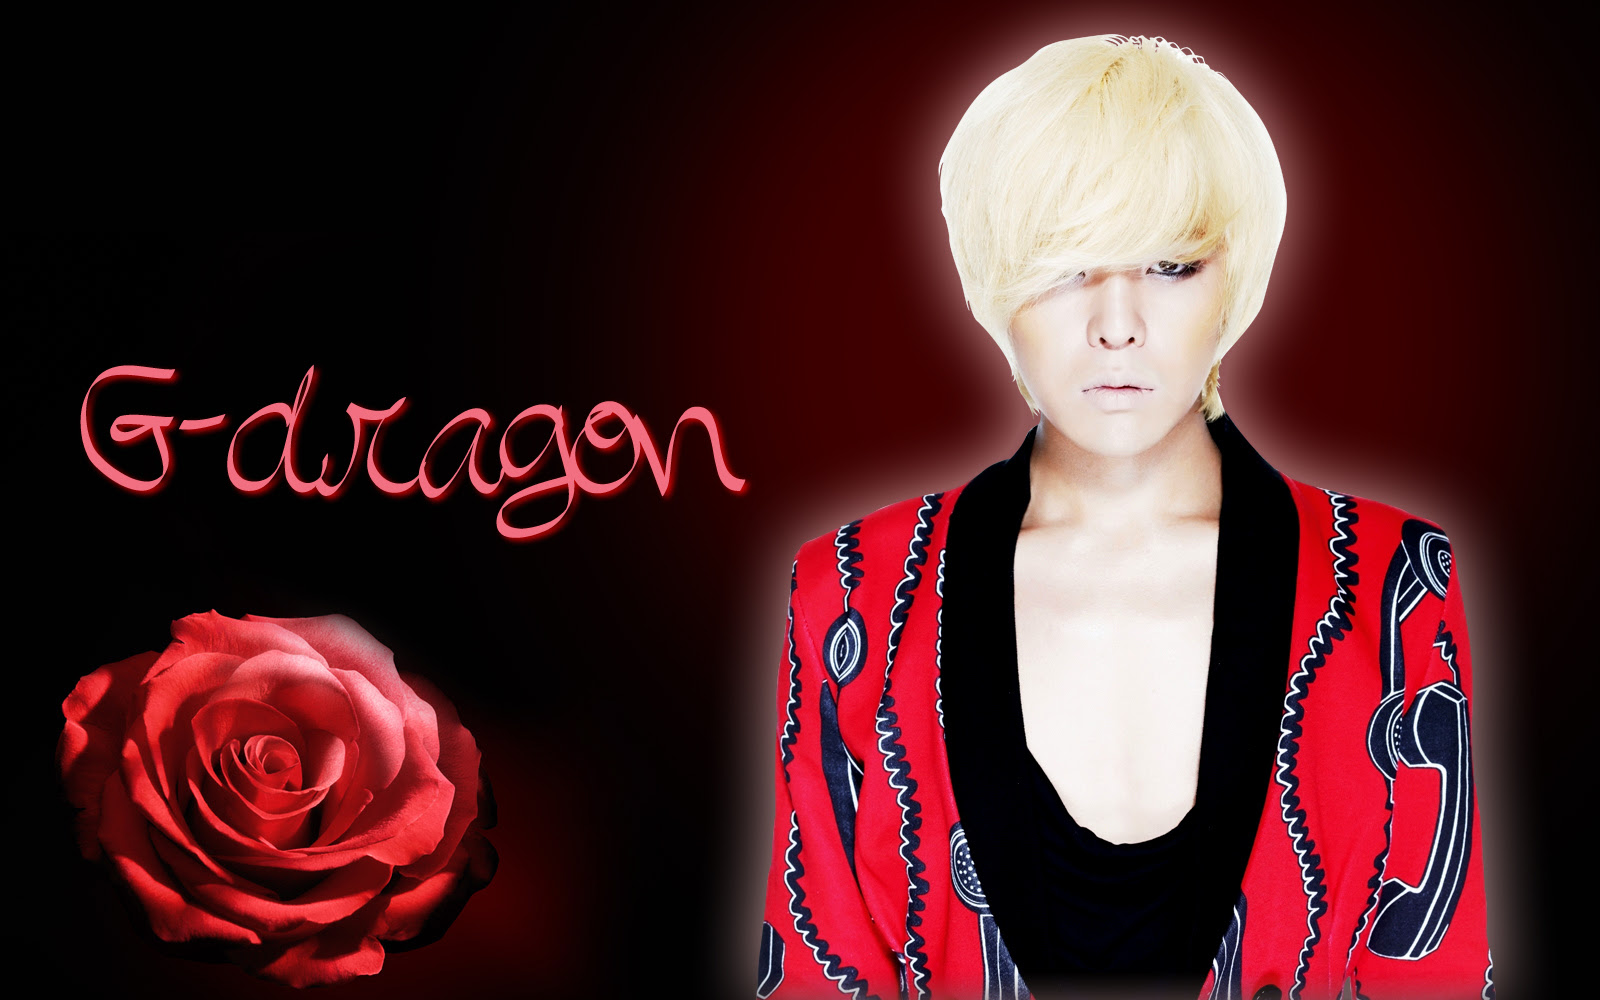 Moving Society Dragon Images Gdragon Hd Wallpaper And Background Photos 9770820